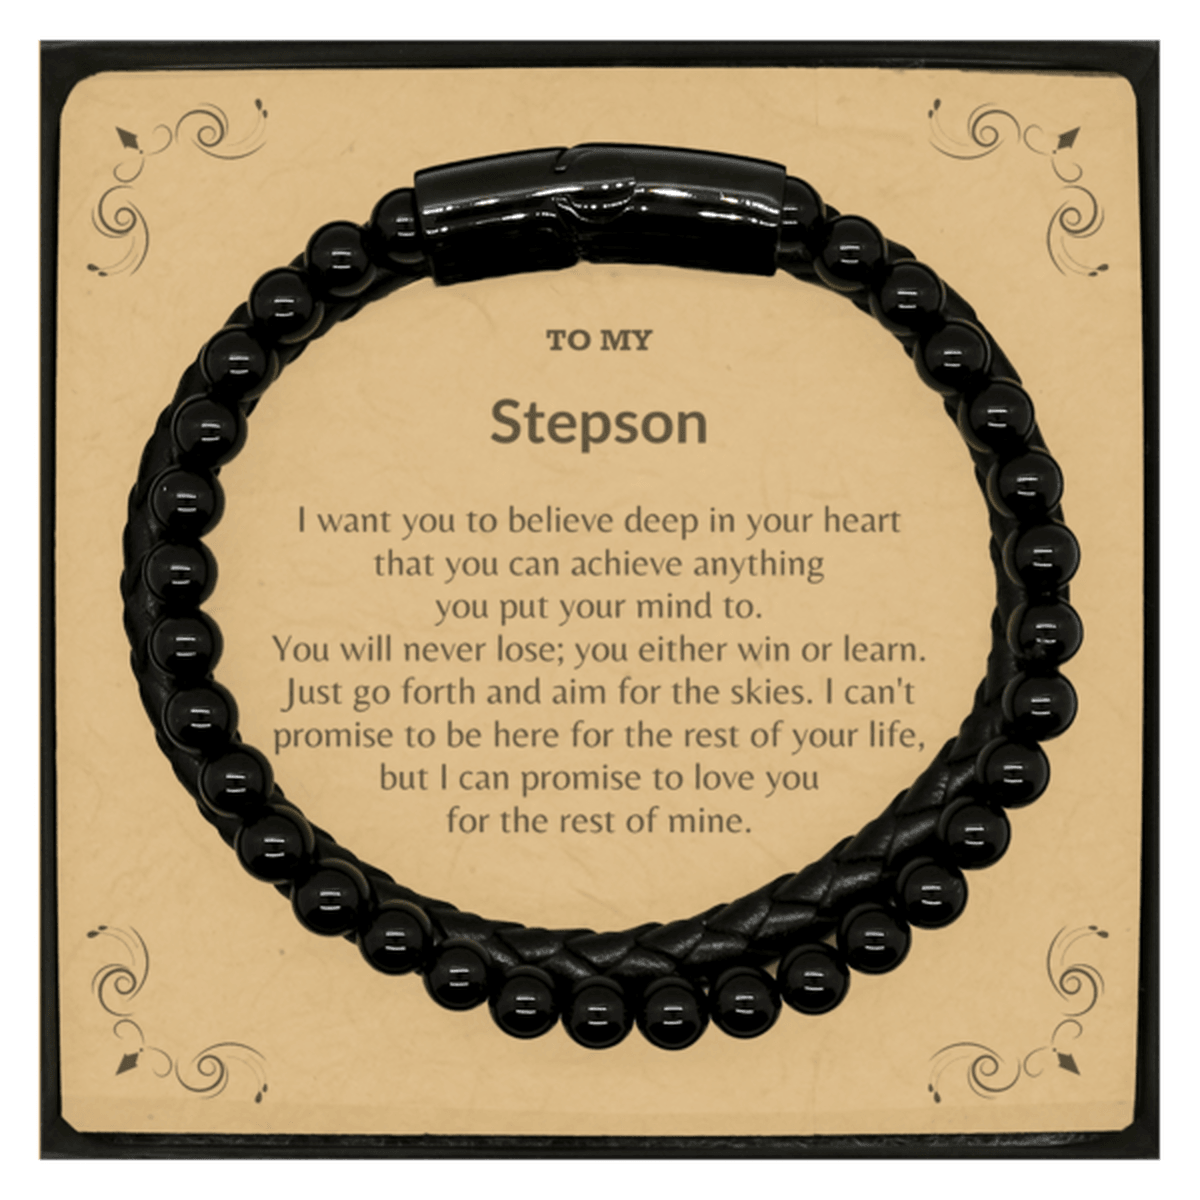 Motivational Stepson Stone Leather Bracelets, Stepson I can promise to love you for the rest of mine, Bracelet with Message Card For Stepson, Stepson Birthday Jewelry Gift for Women Men - Mallard Moon Gift Shop